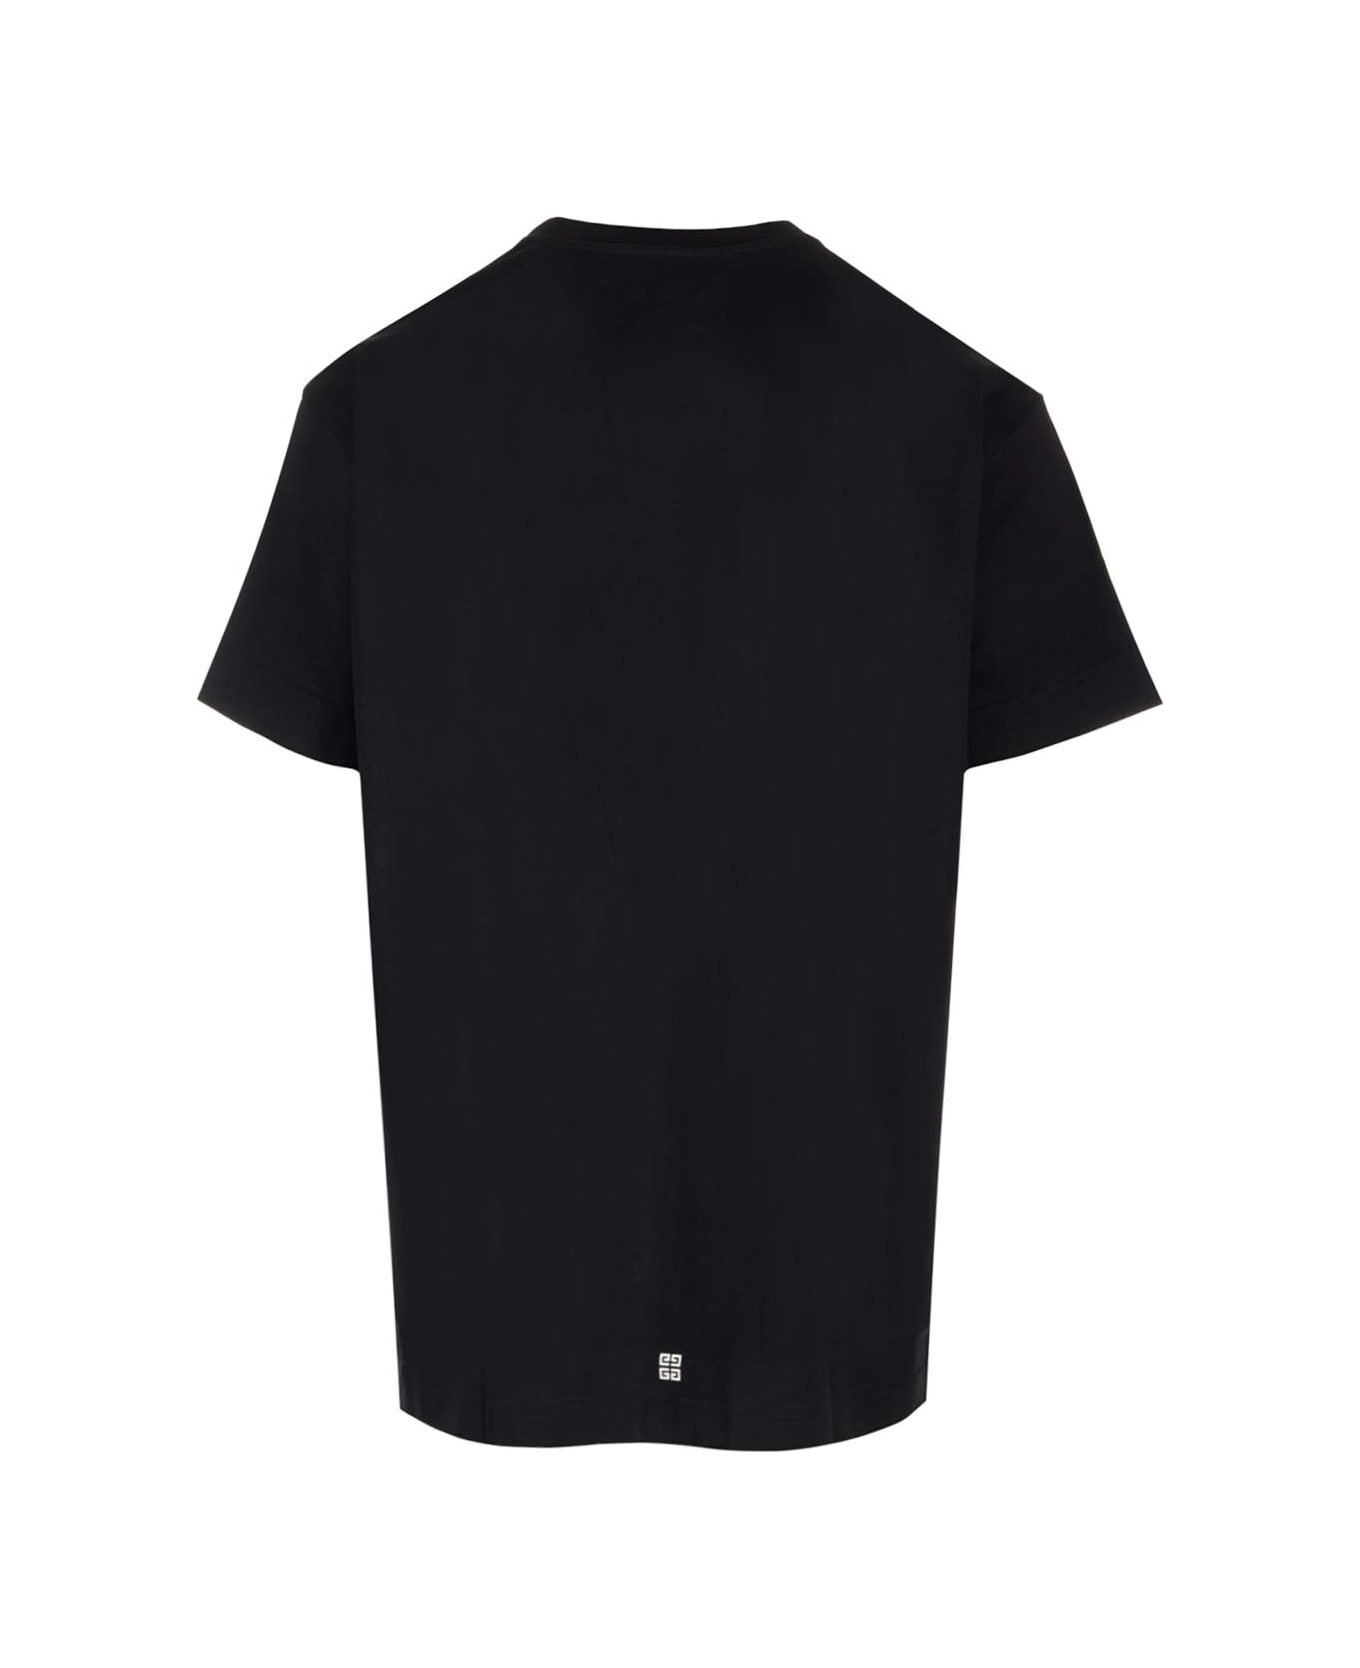 Givenchy Oversized Fit T-shirt - Black シャツ